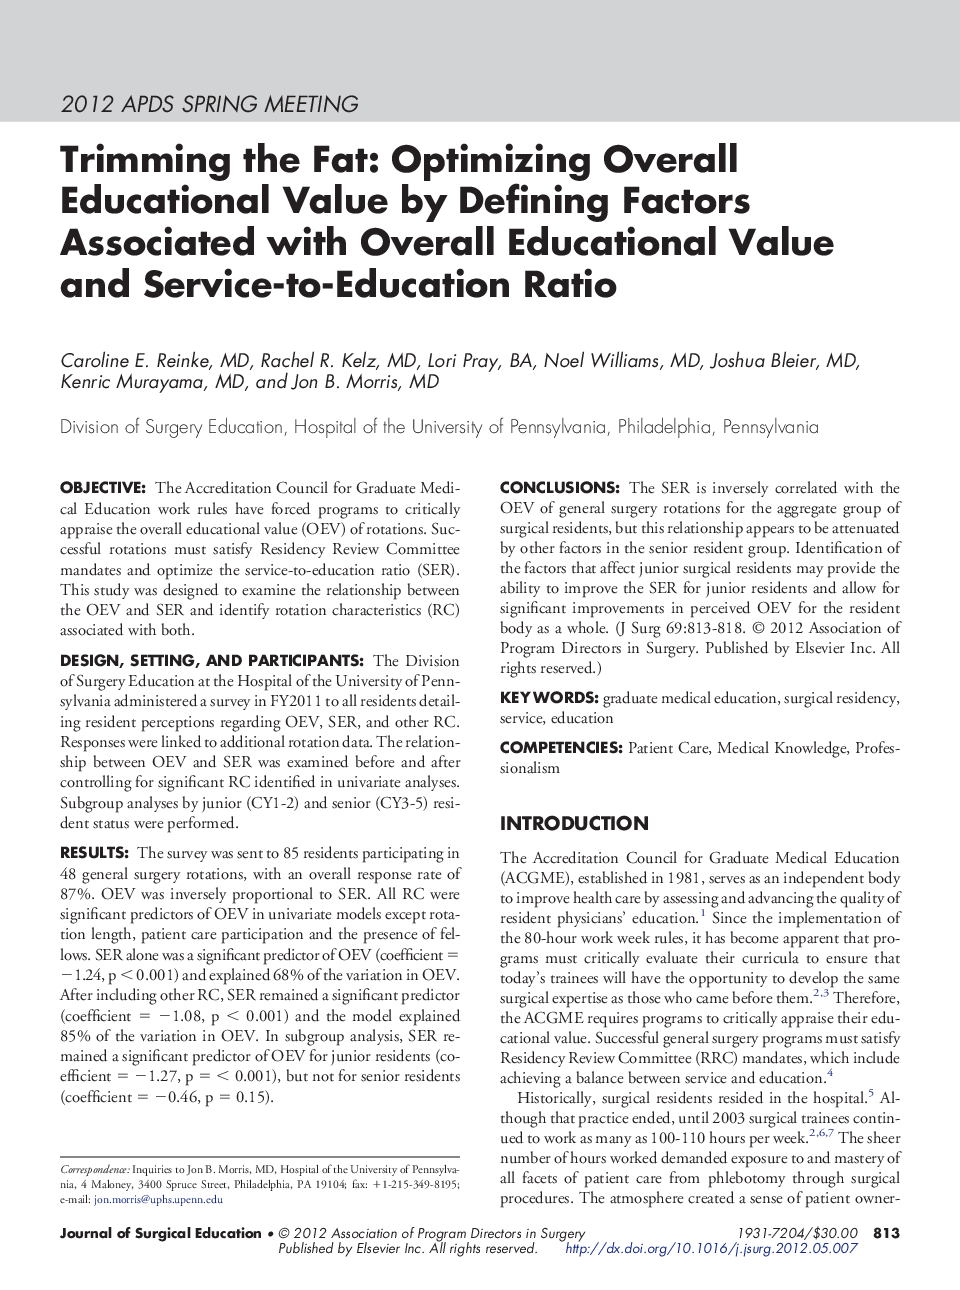 Trimming the Fat: Optimizing Overall Educational Value by Defining Factors Associated with Overall Educational Value and Service-to-Education Ratio